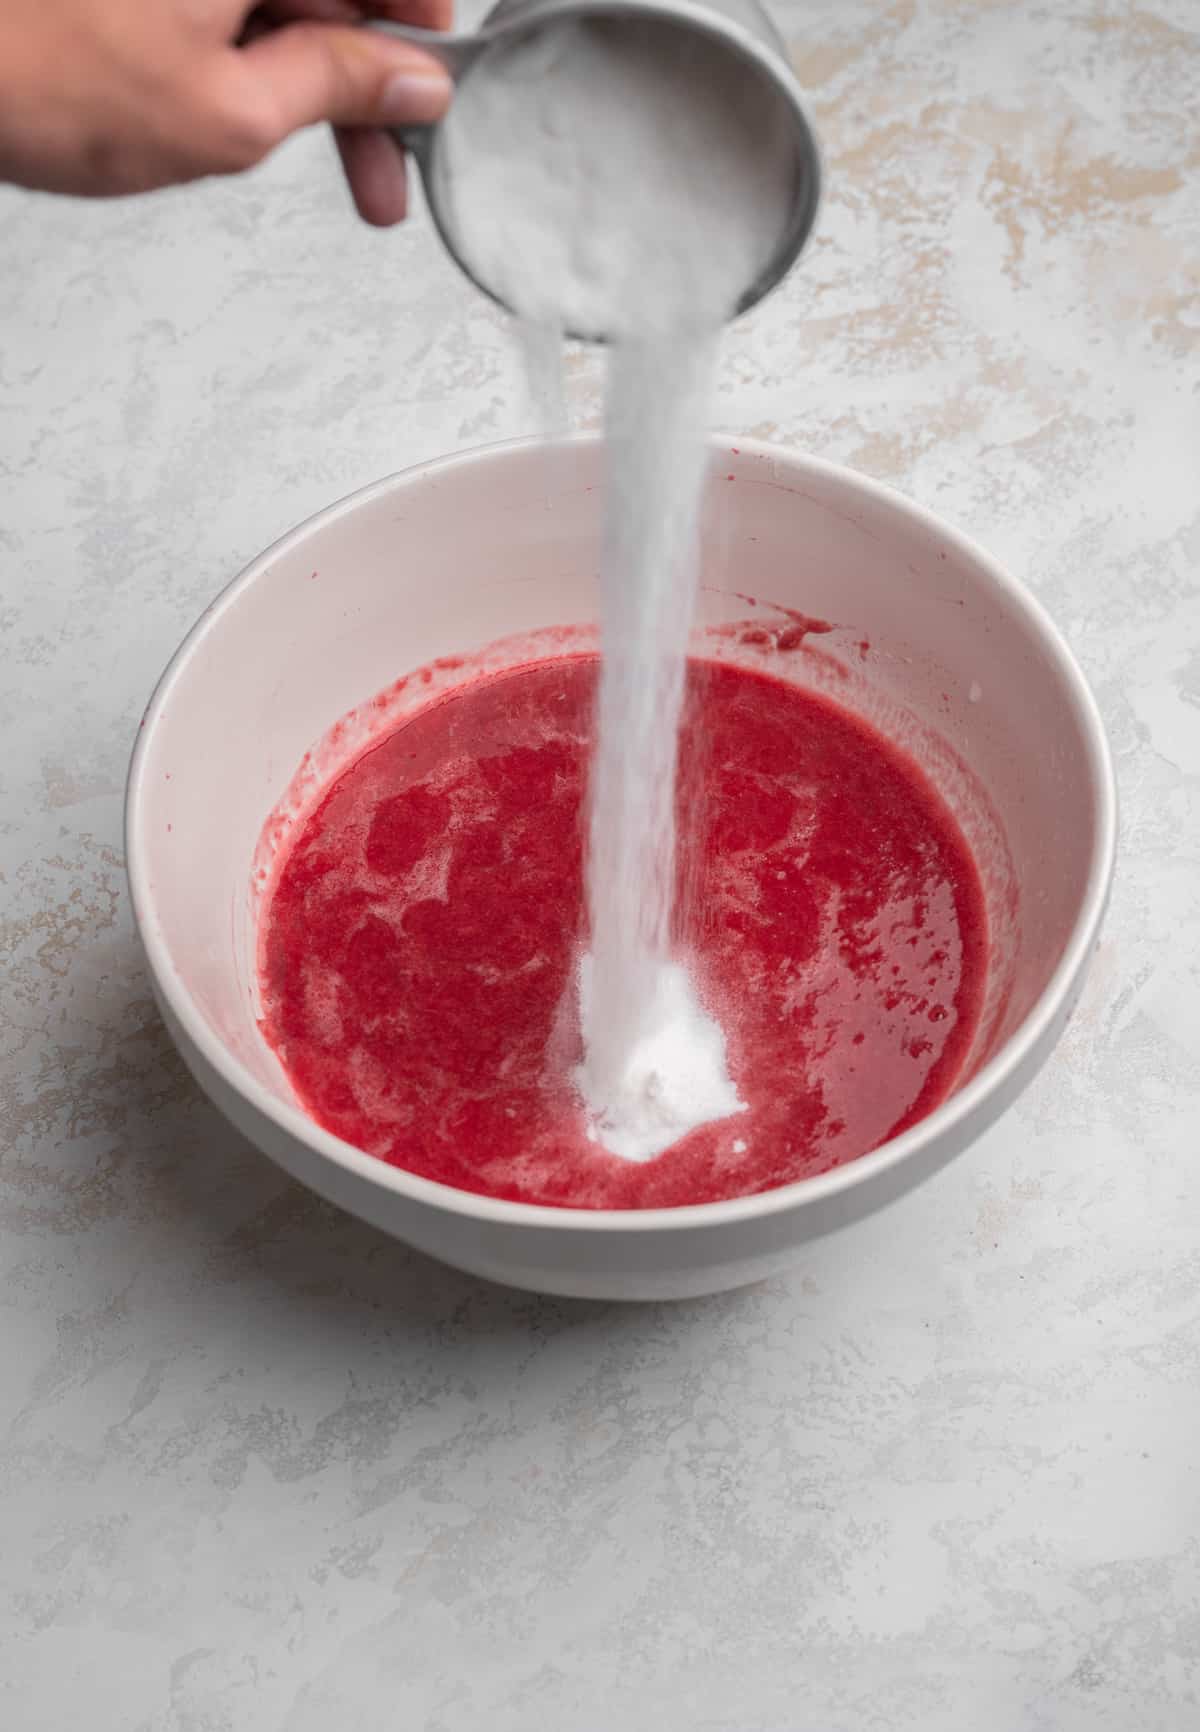 Sugar being poured into raspberry puree